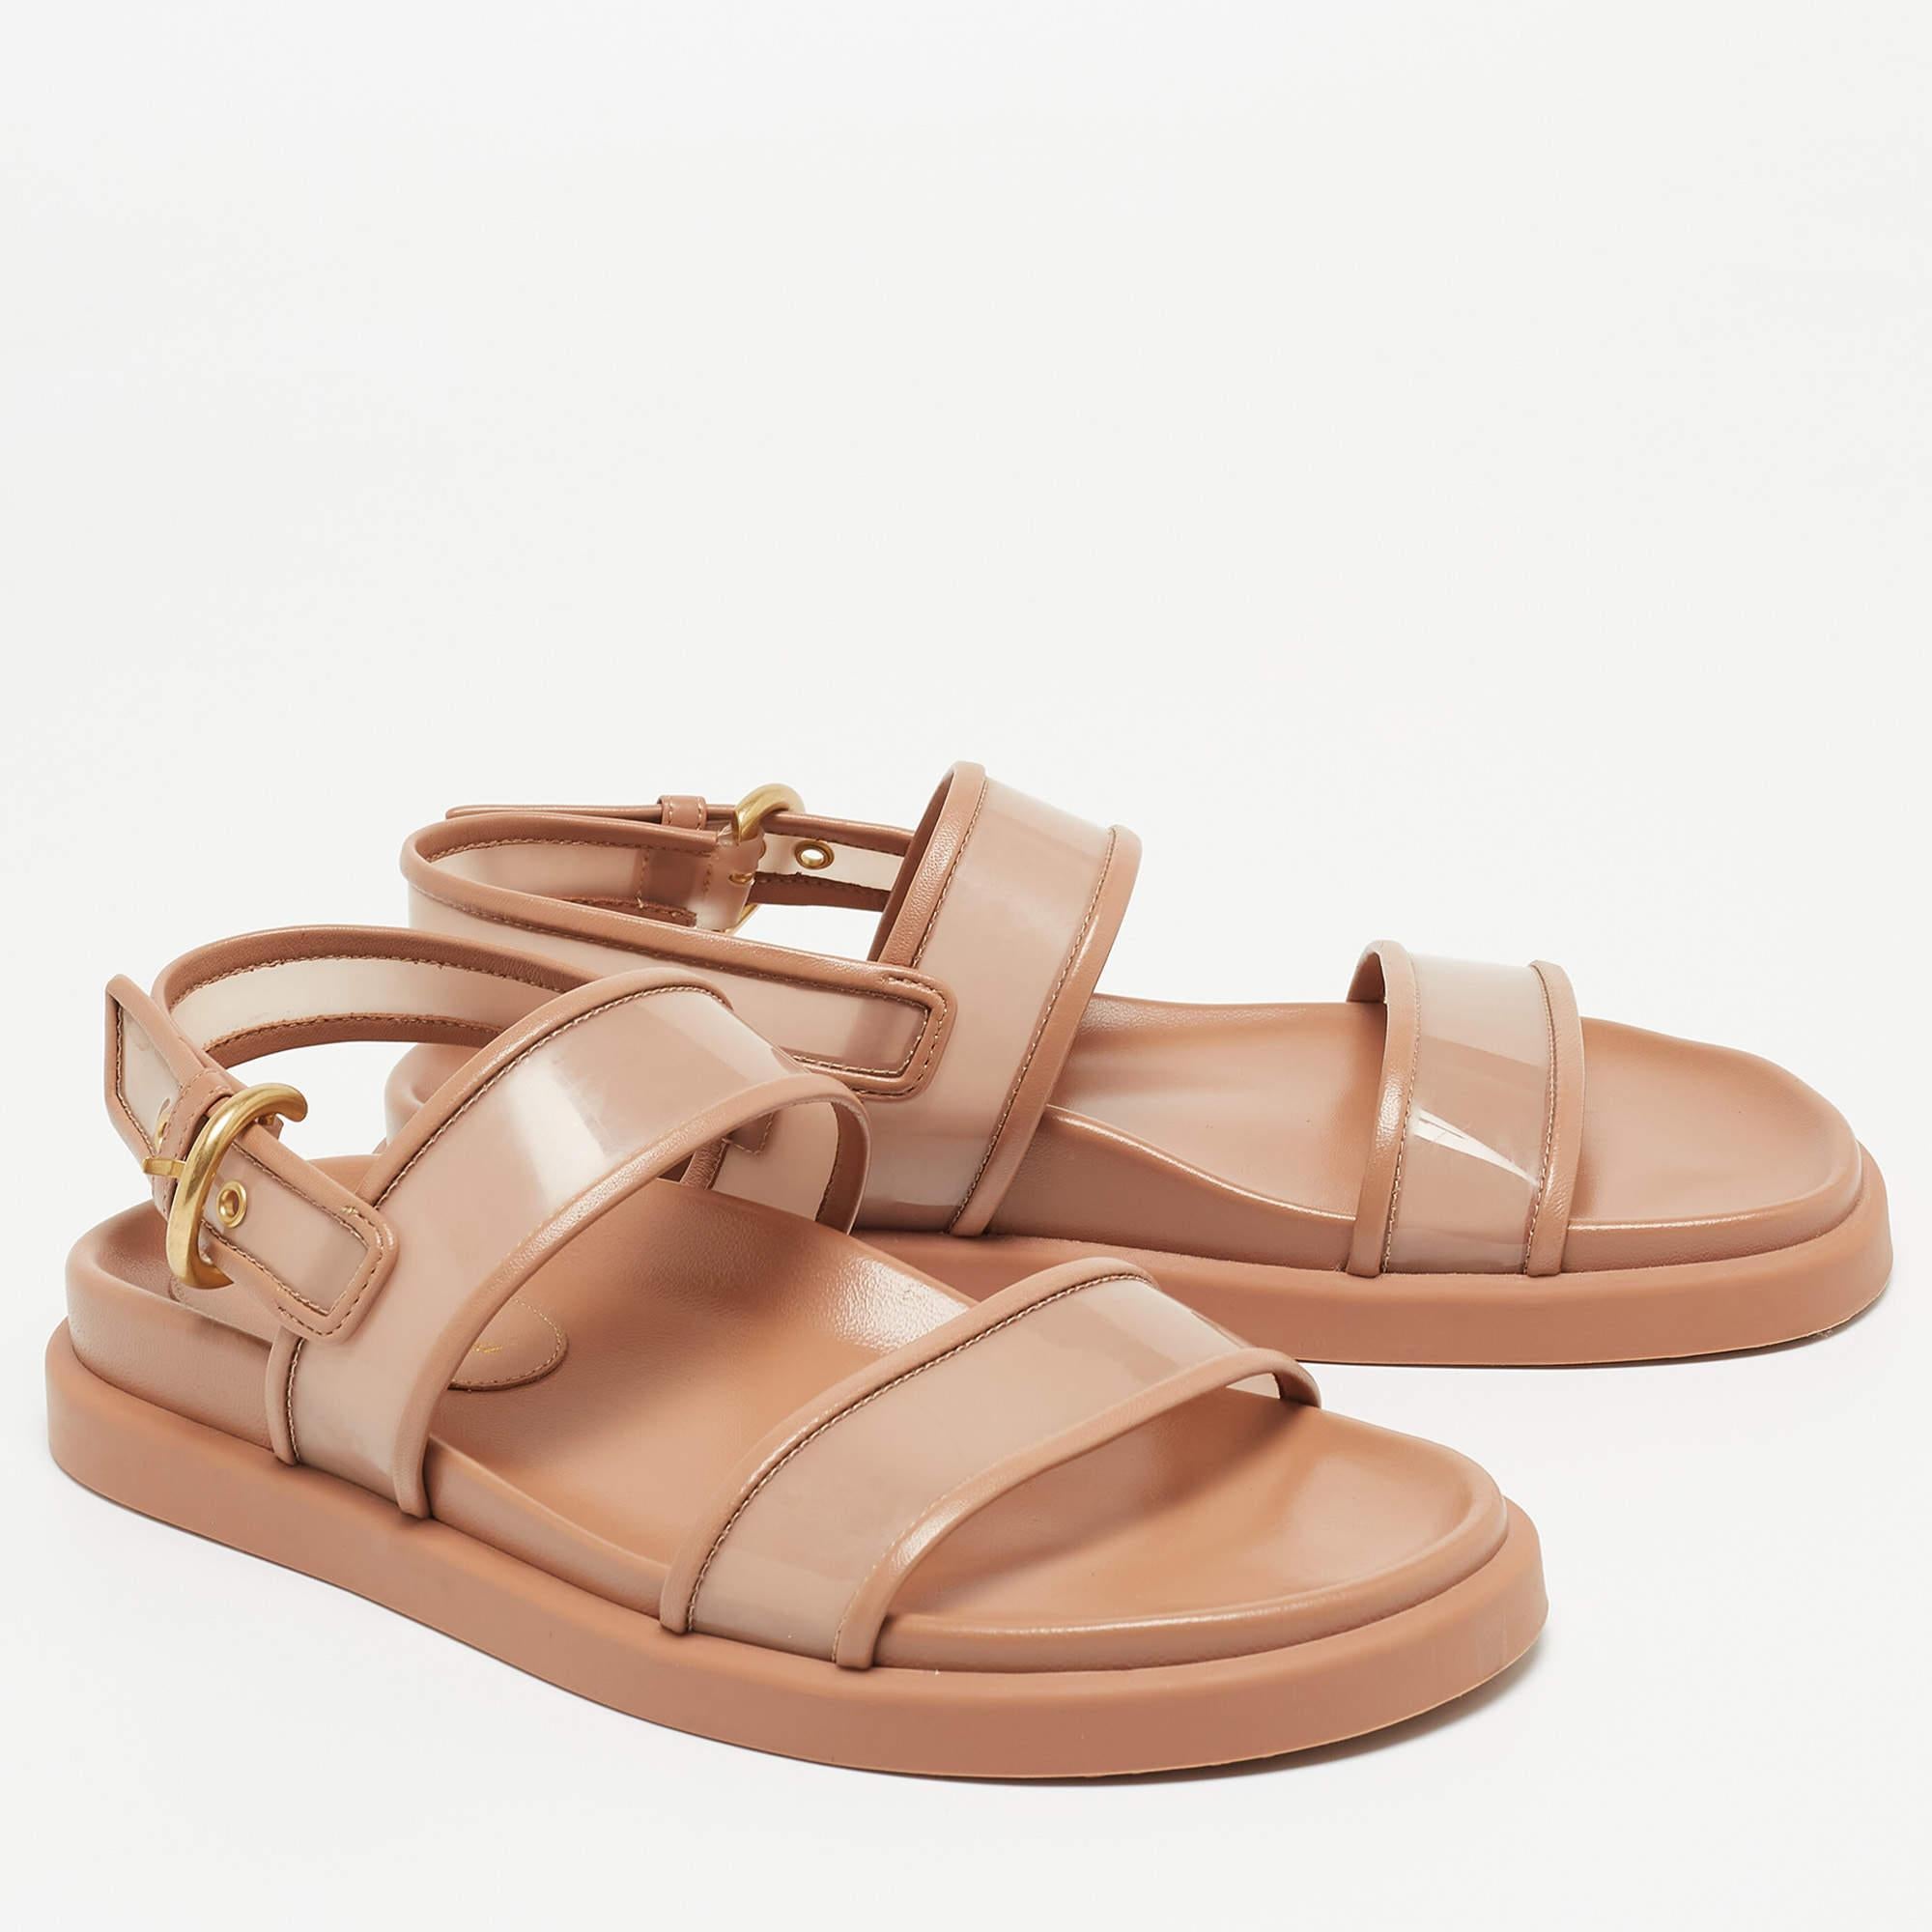 These sandals will offer you both luxury and comfort. Made from quality materials, they come in a versatile shade and are equipped with comfortable insoles.

